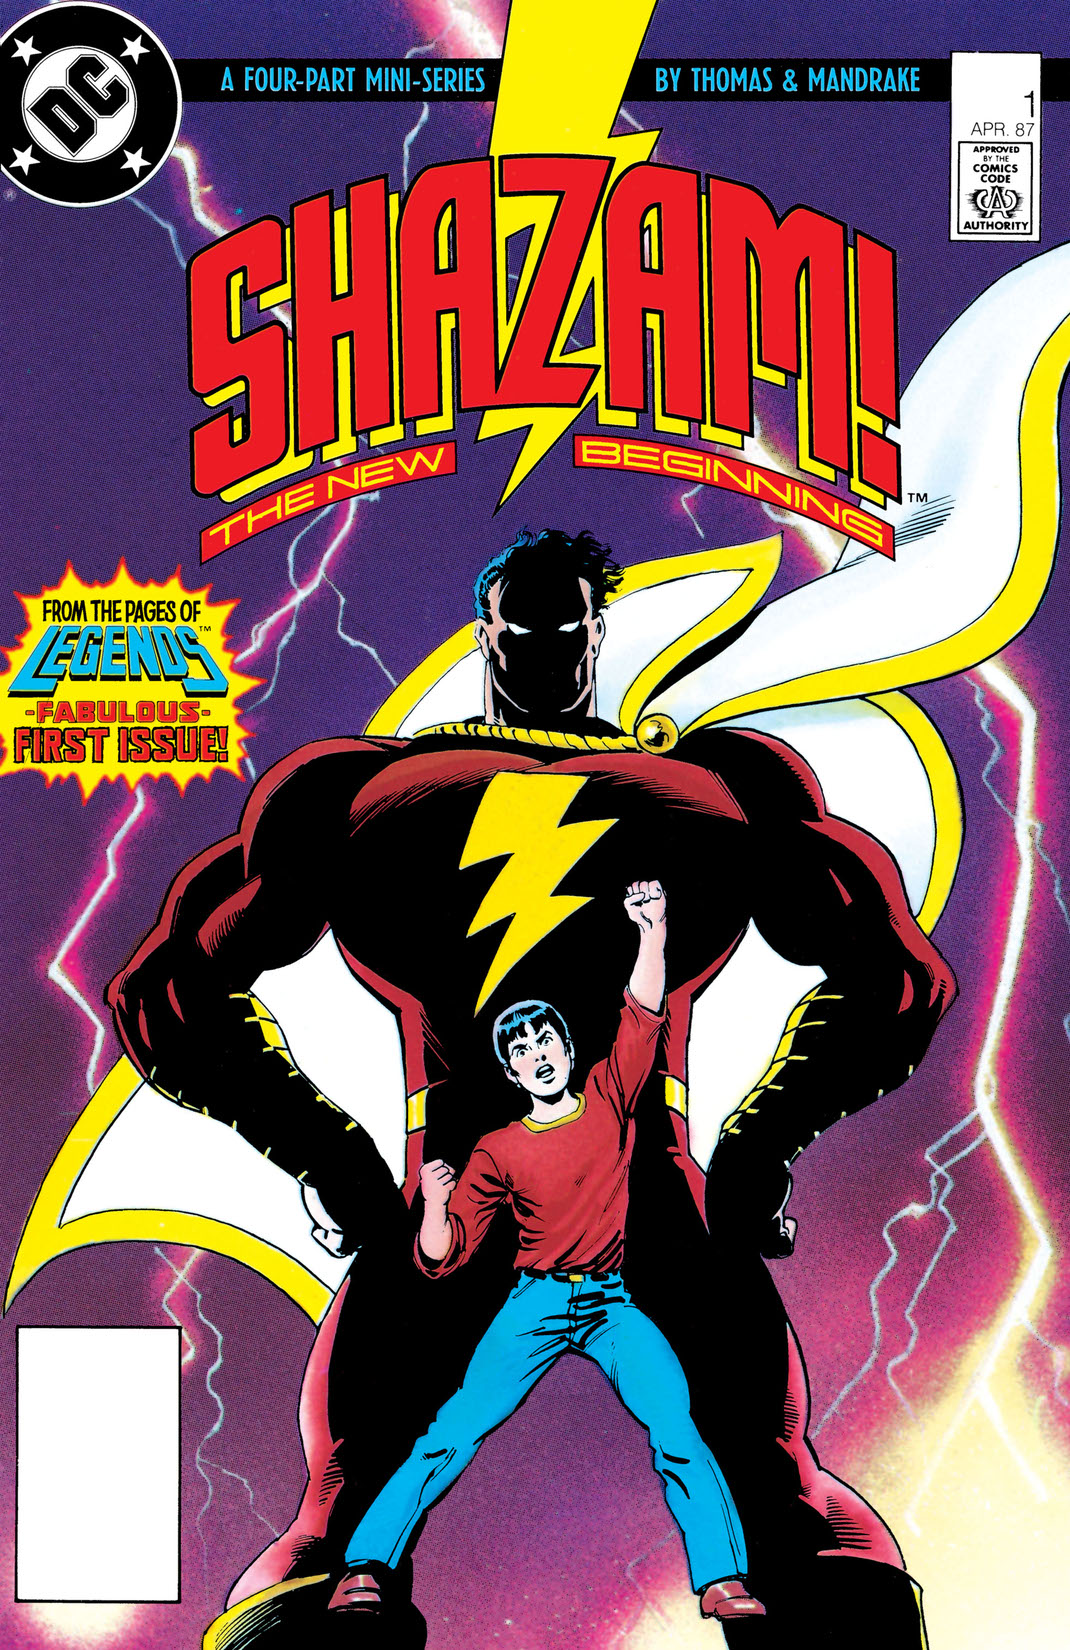 Shazam! The New Beginning #1 preview images